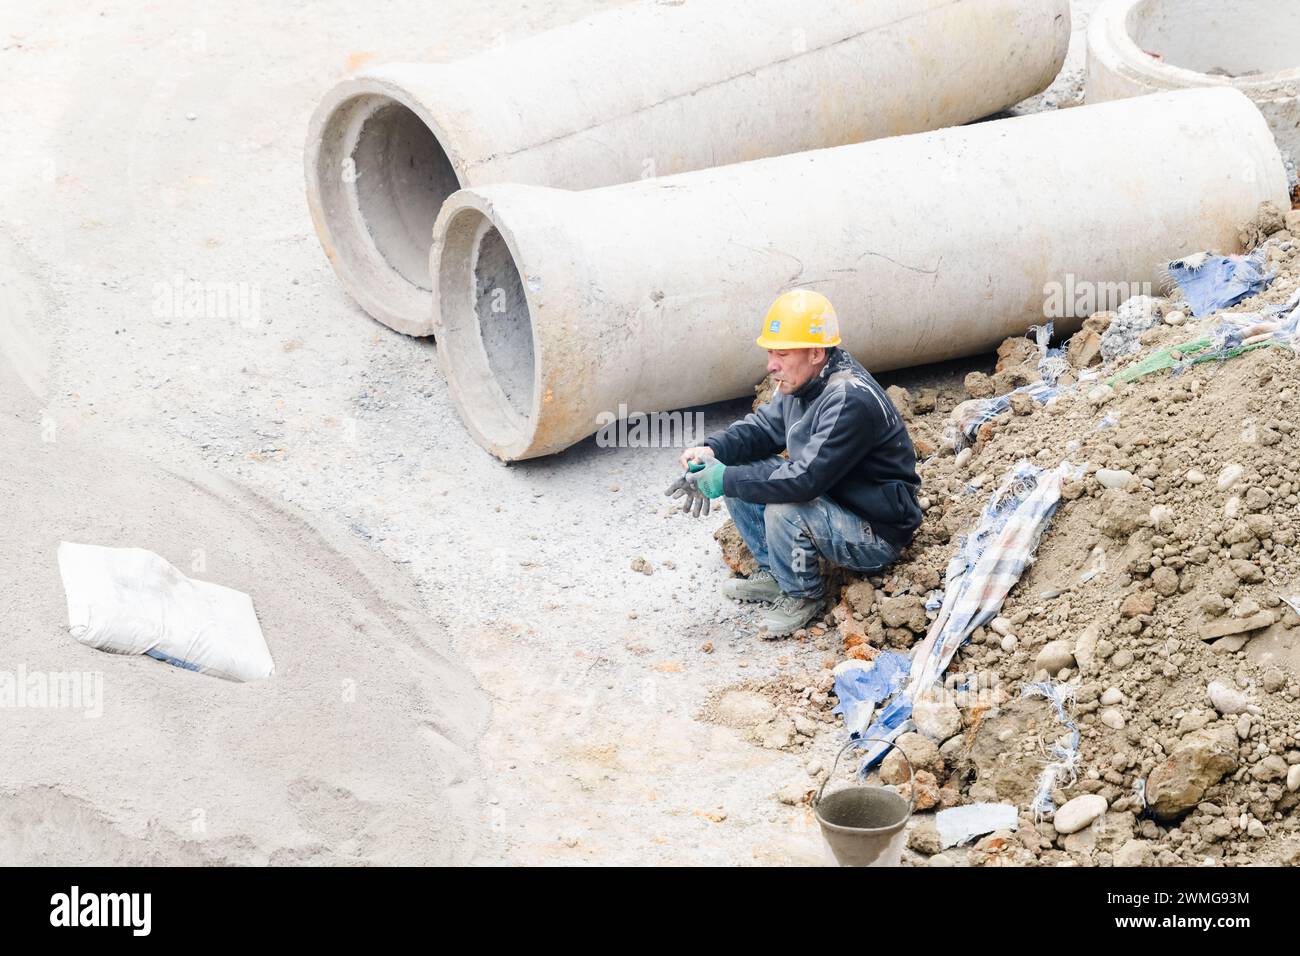 Workers taking a break and smoking at the construction site Stock Photo